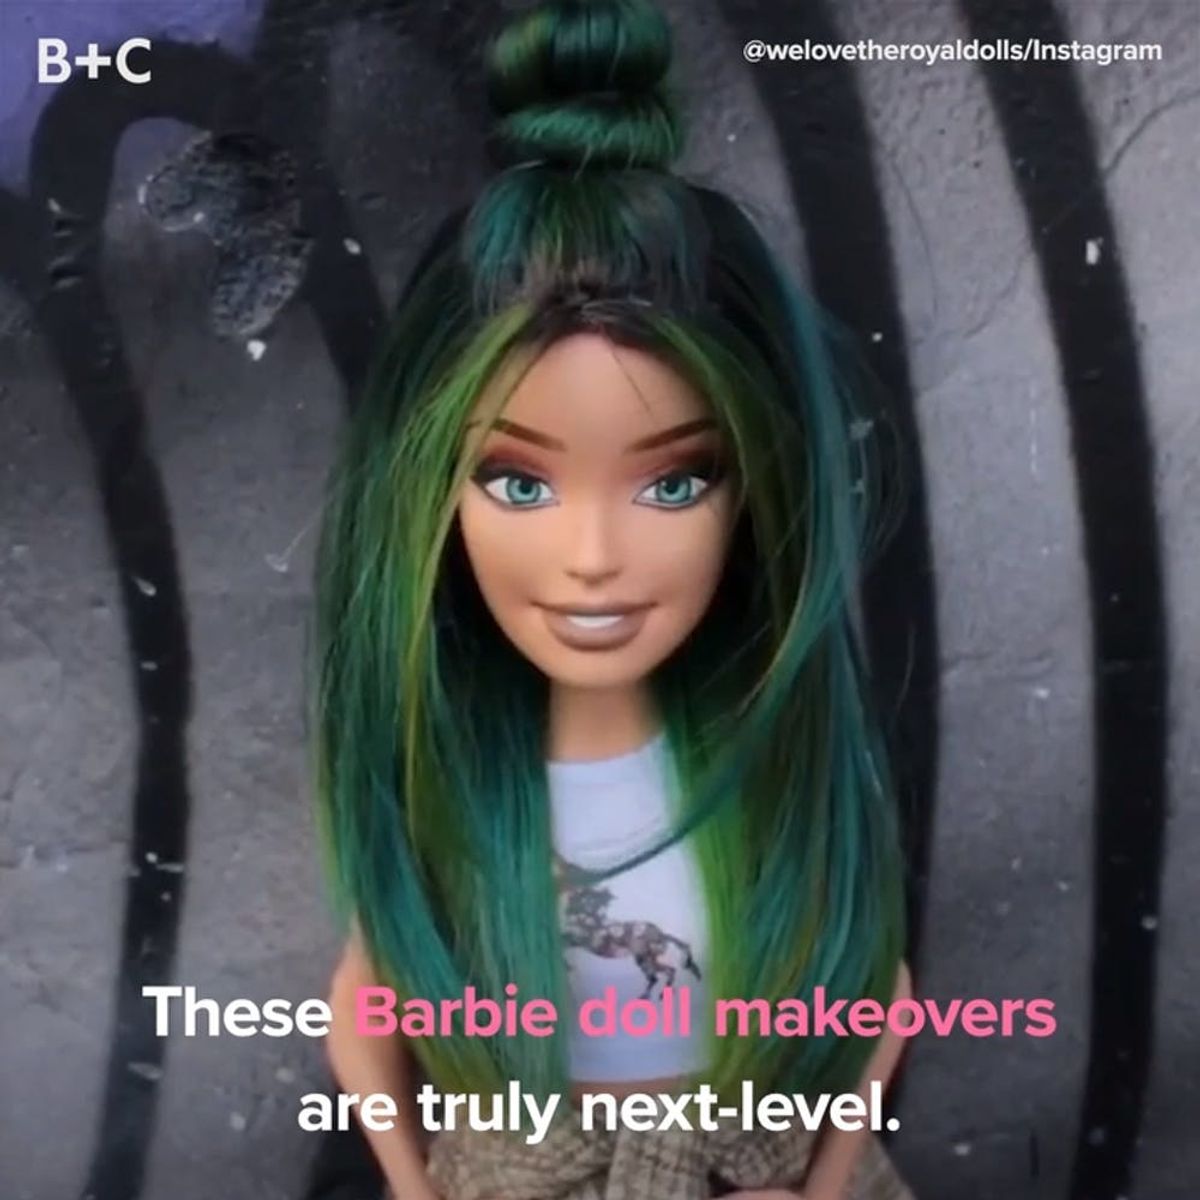 These Barbie Doll Makeovers Are Next-Level Awesome